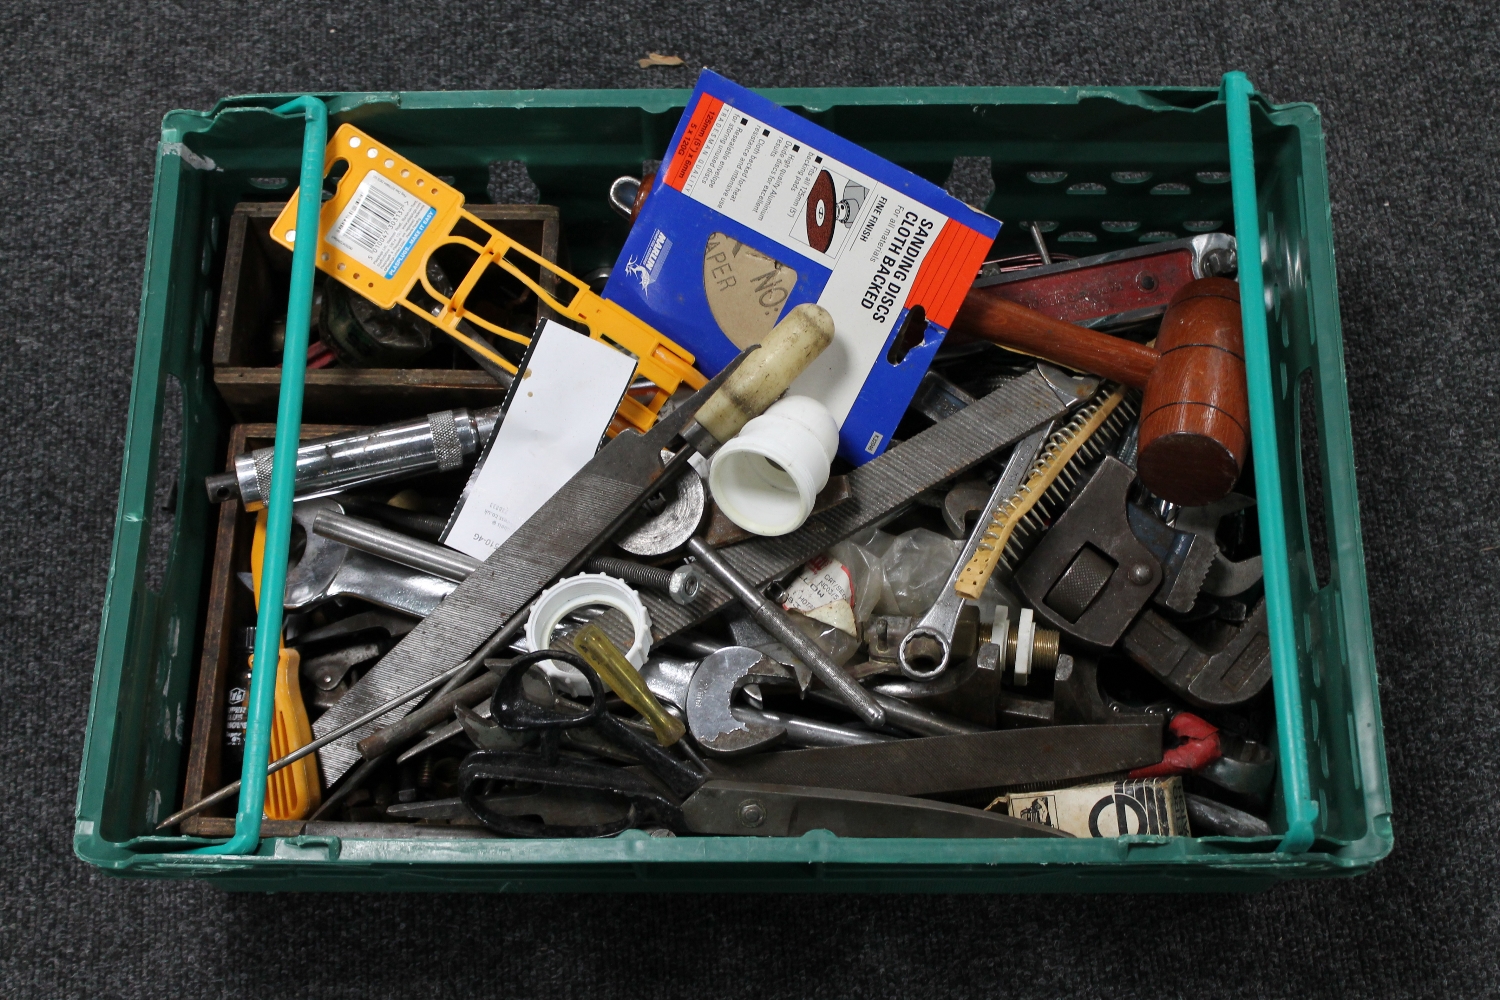 A crate of hand tools,